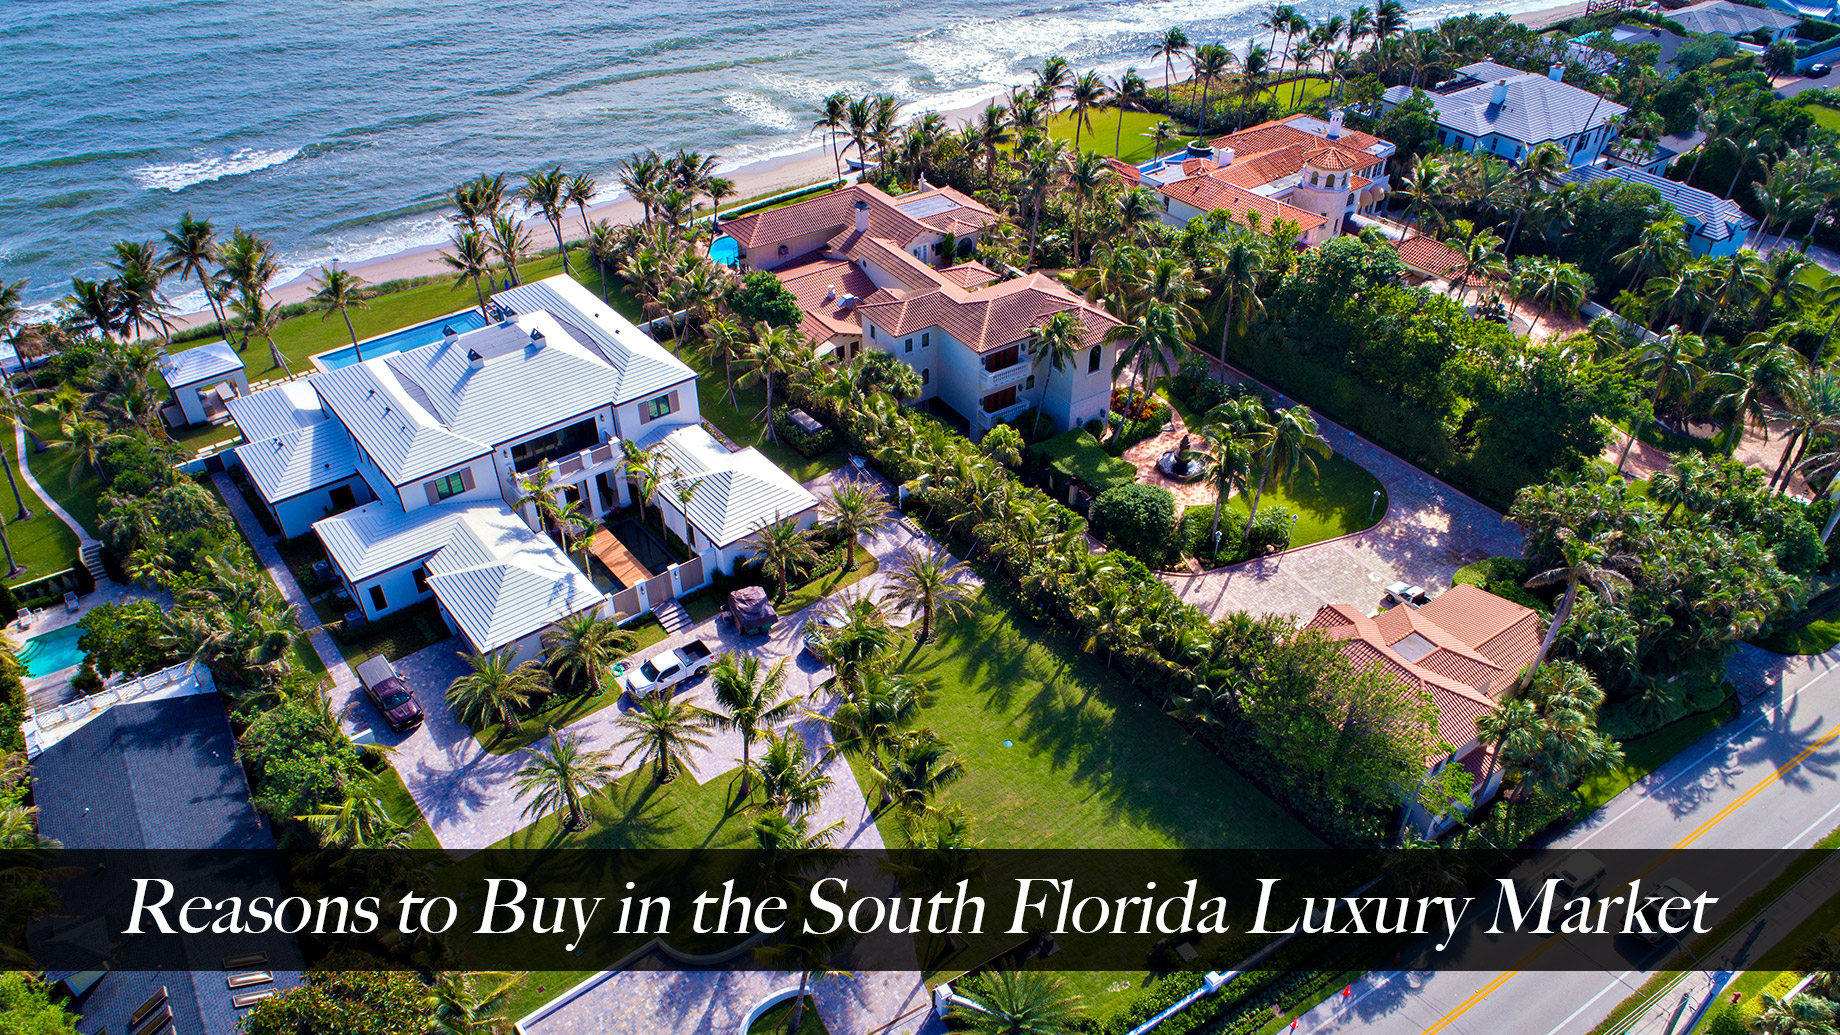 Reasons to Buy in the South Florida Luxury Market